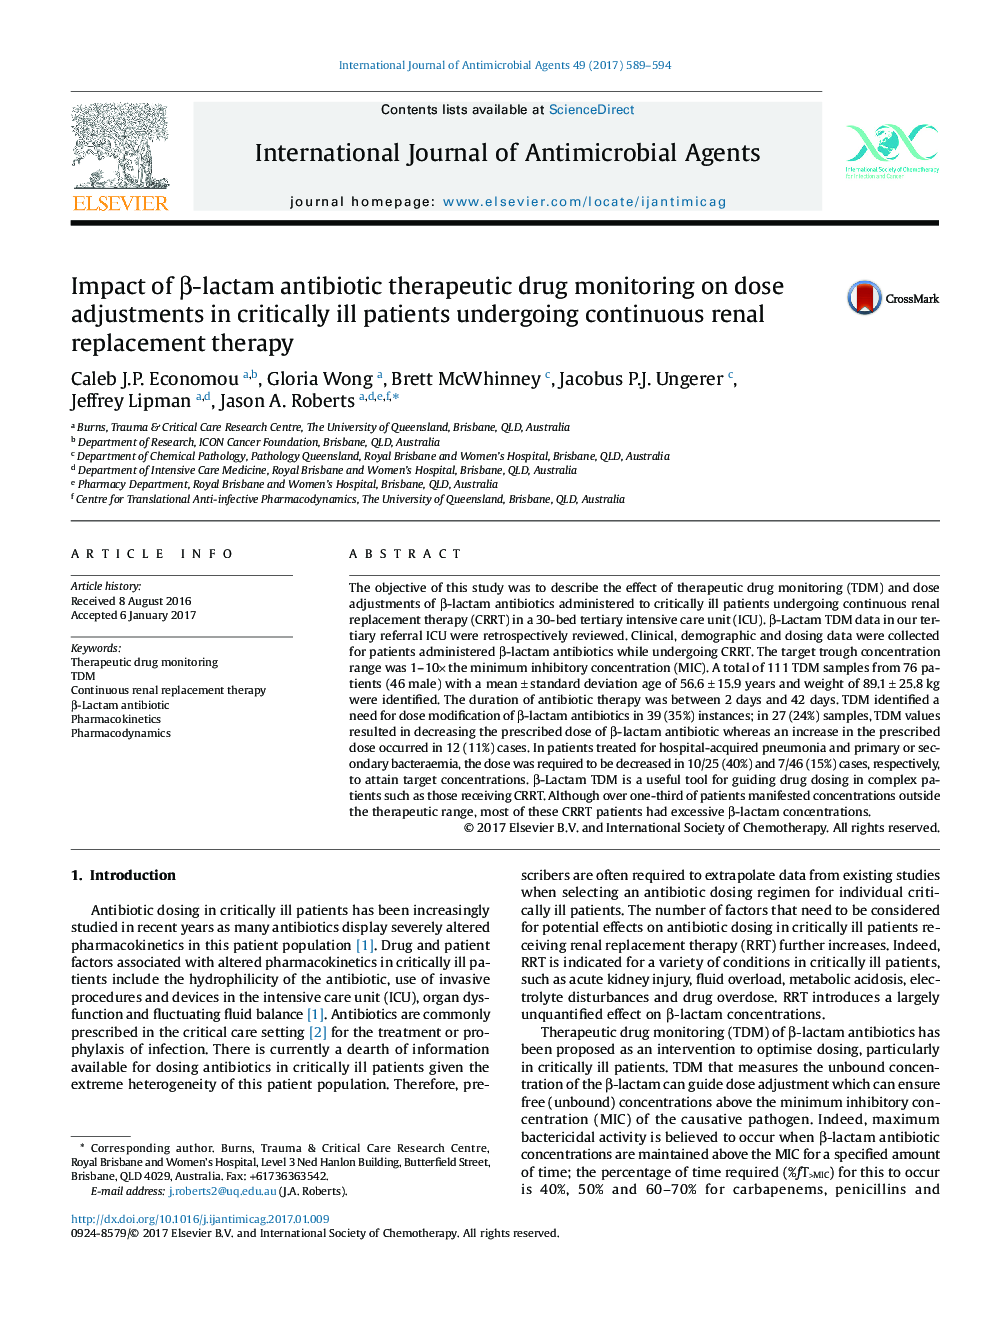 Impact of Î²-lactam antibiotic therapeutic drug monitoring on dose adjustments in critically ill patients undergoing continuous renal replacement therapy